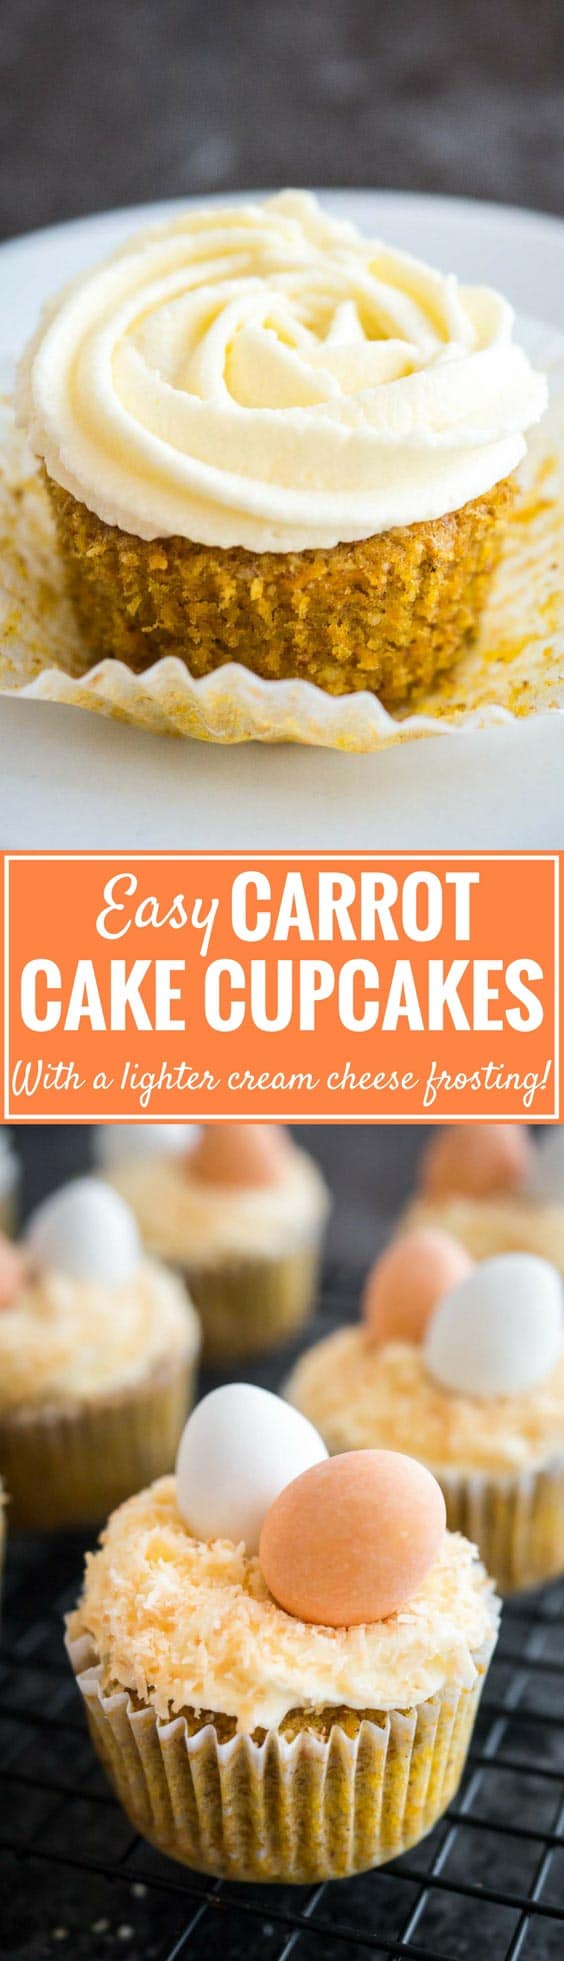 A pinterest collage. Carrot cake cupcake with cream cheese frosting, Carrot cake cupcake with sugar eggs and text in the middle: Easy Carrot Cake Cupcakes With a lighter cream cheese frosting